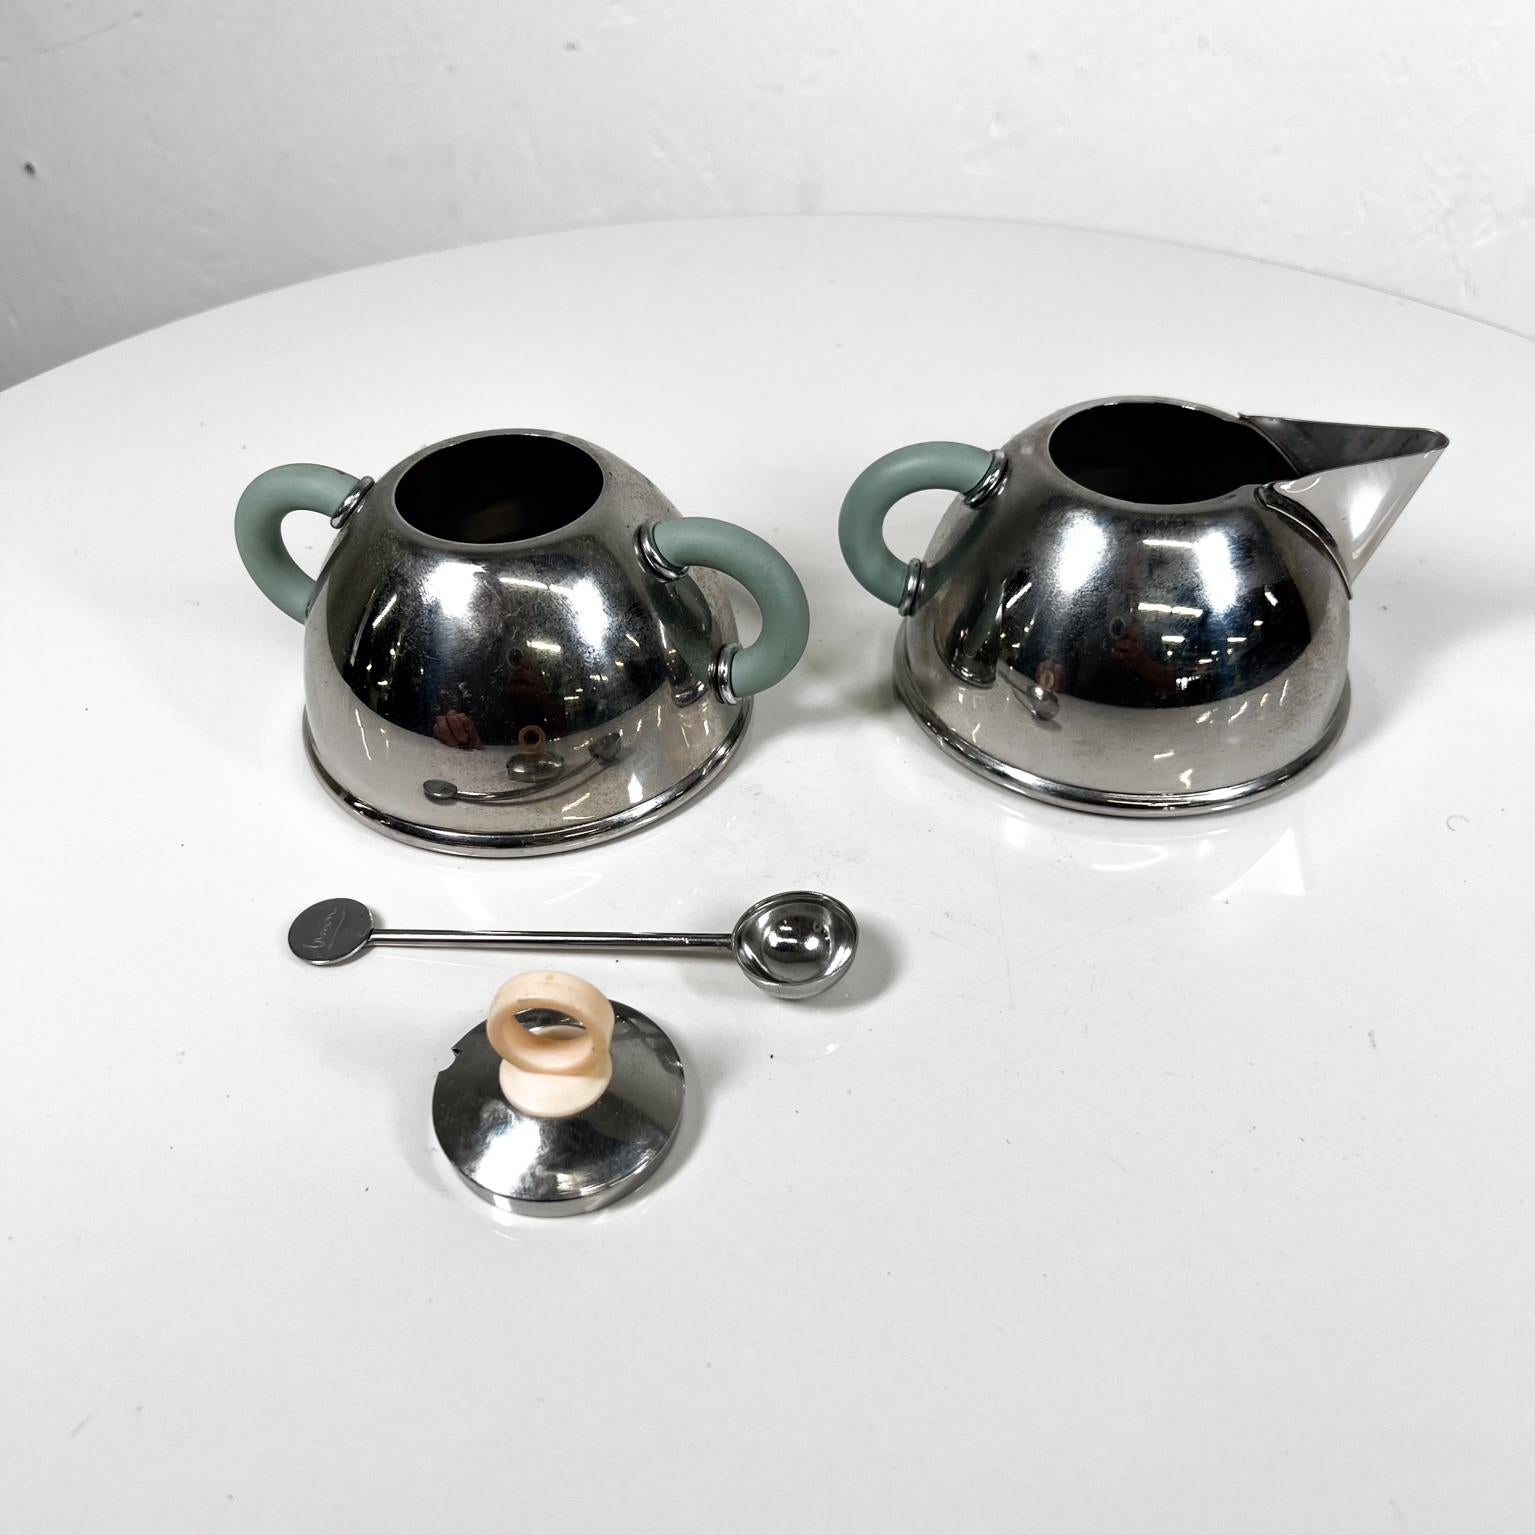 1985 Iconic Alessi Sugar Bowl + Creamer designed by Michael Graves For Sale 1